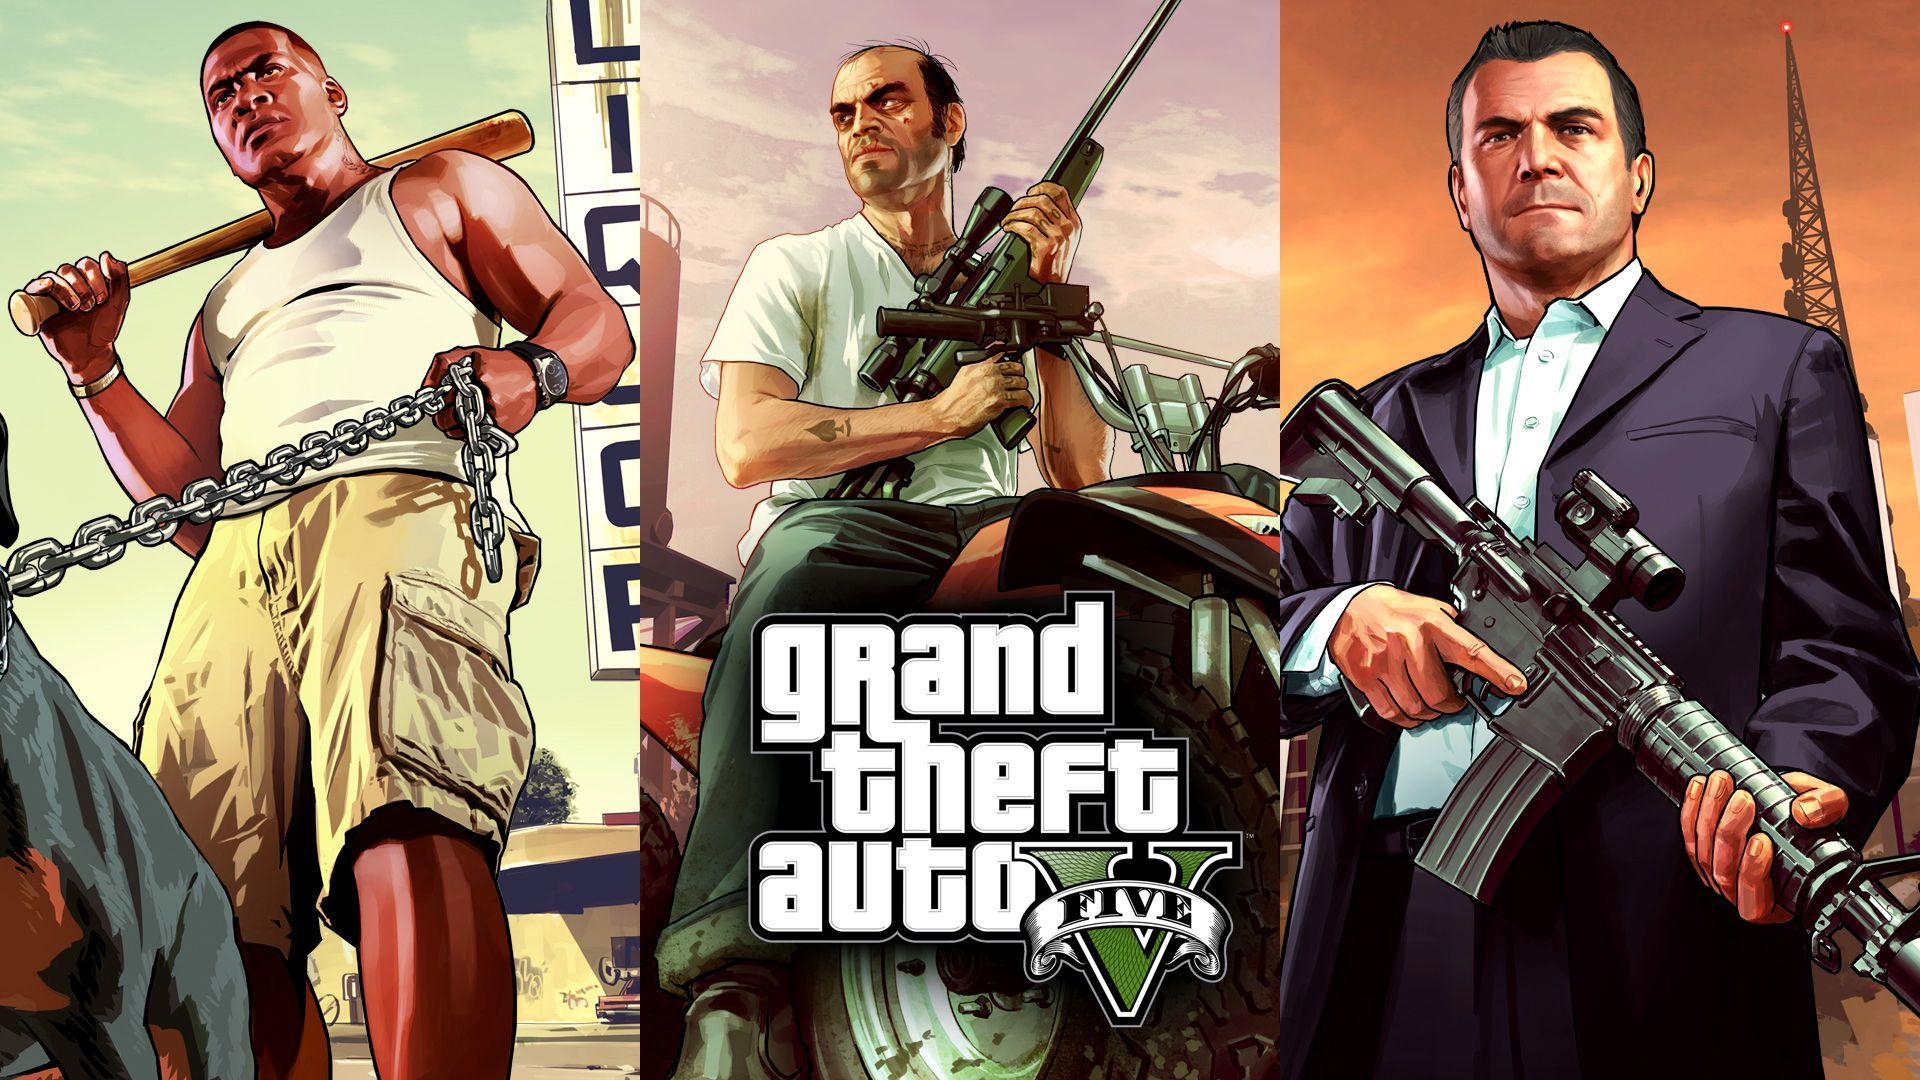 Grand Theft Auto 5 Wallpaper, Image Collection of Grand Theft